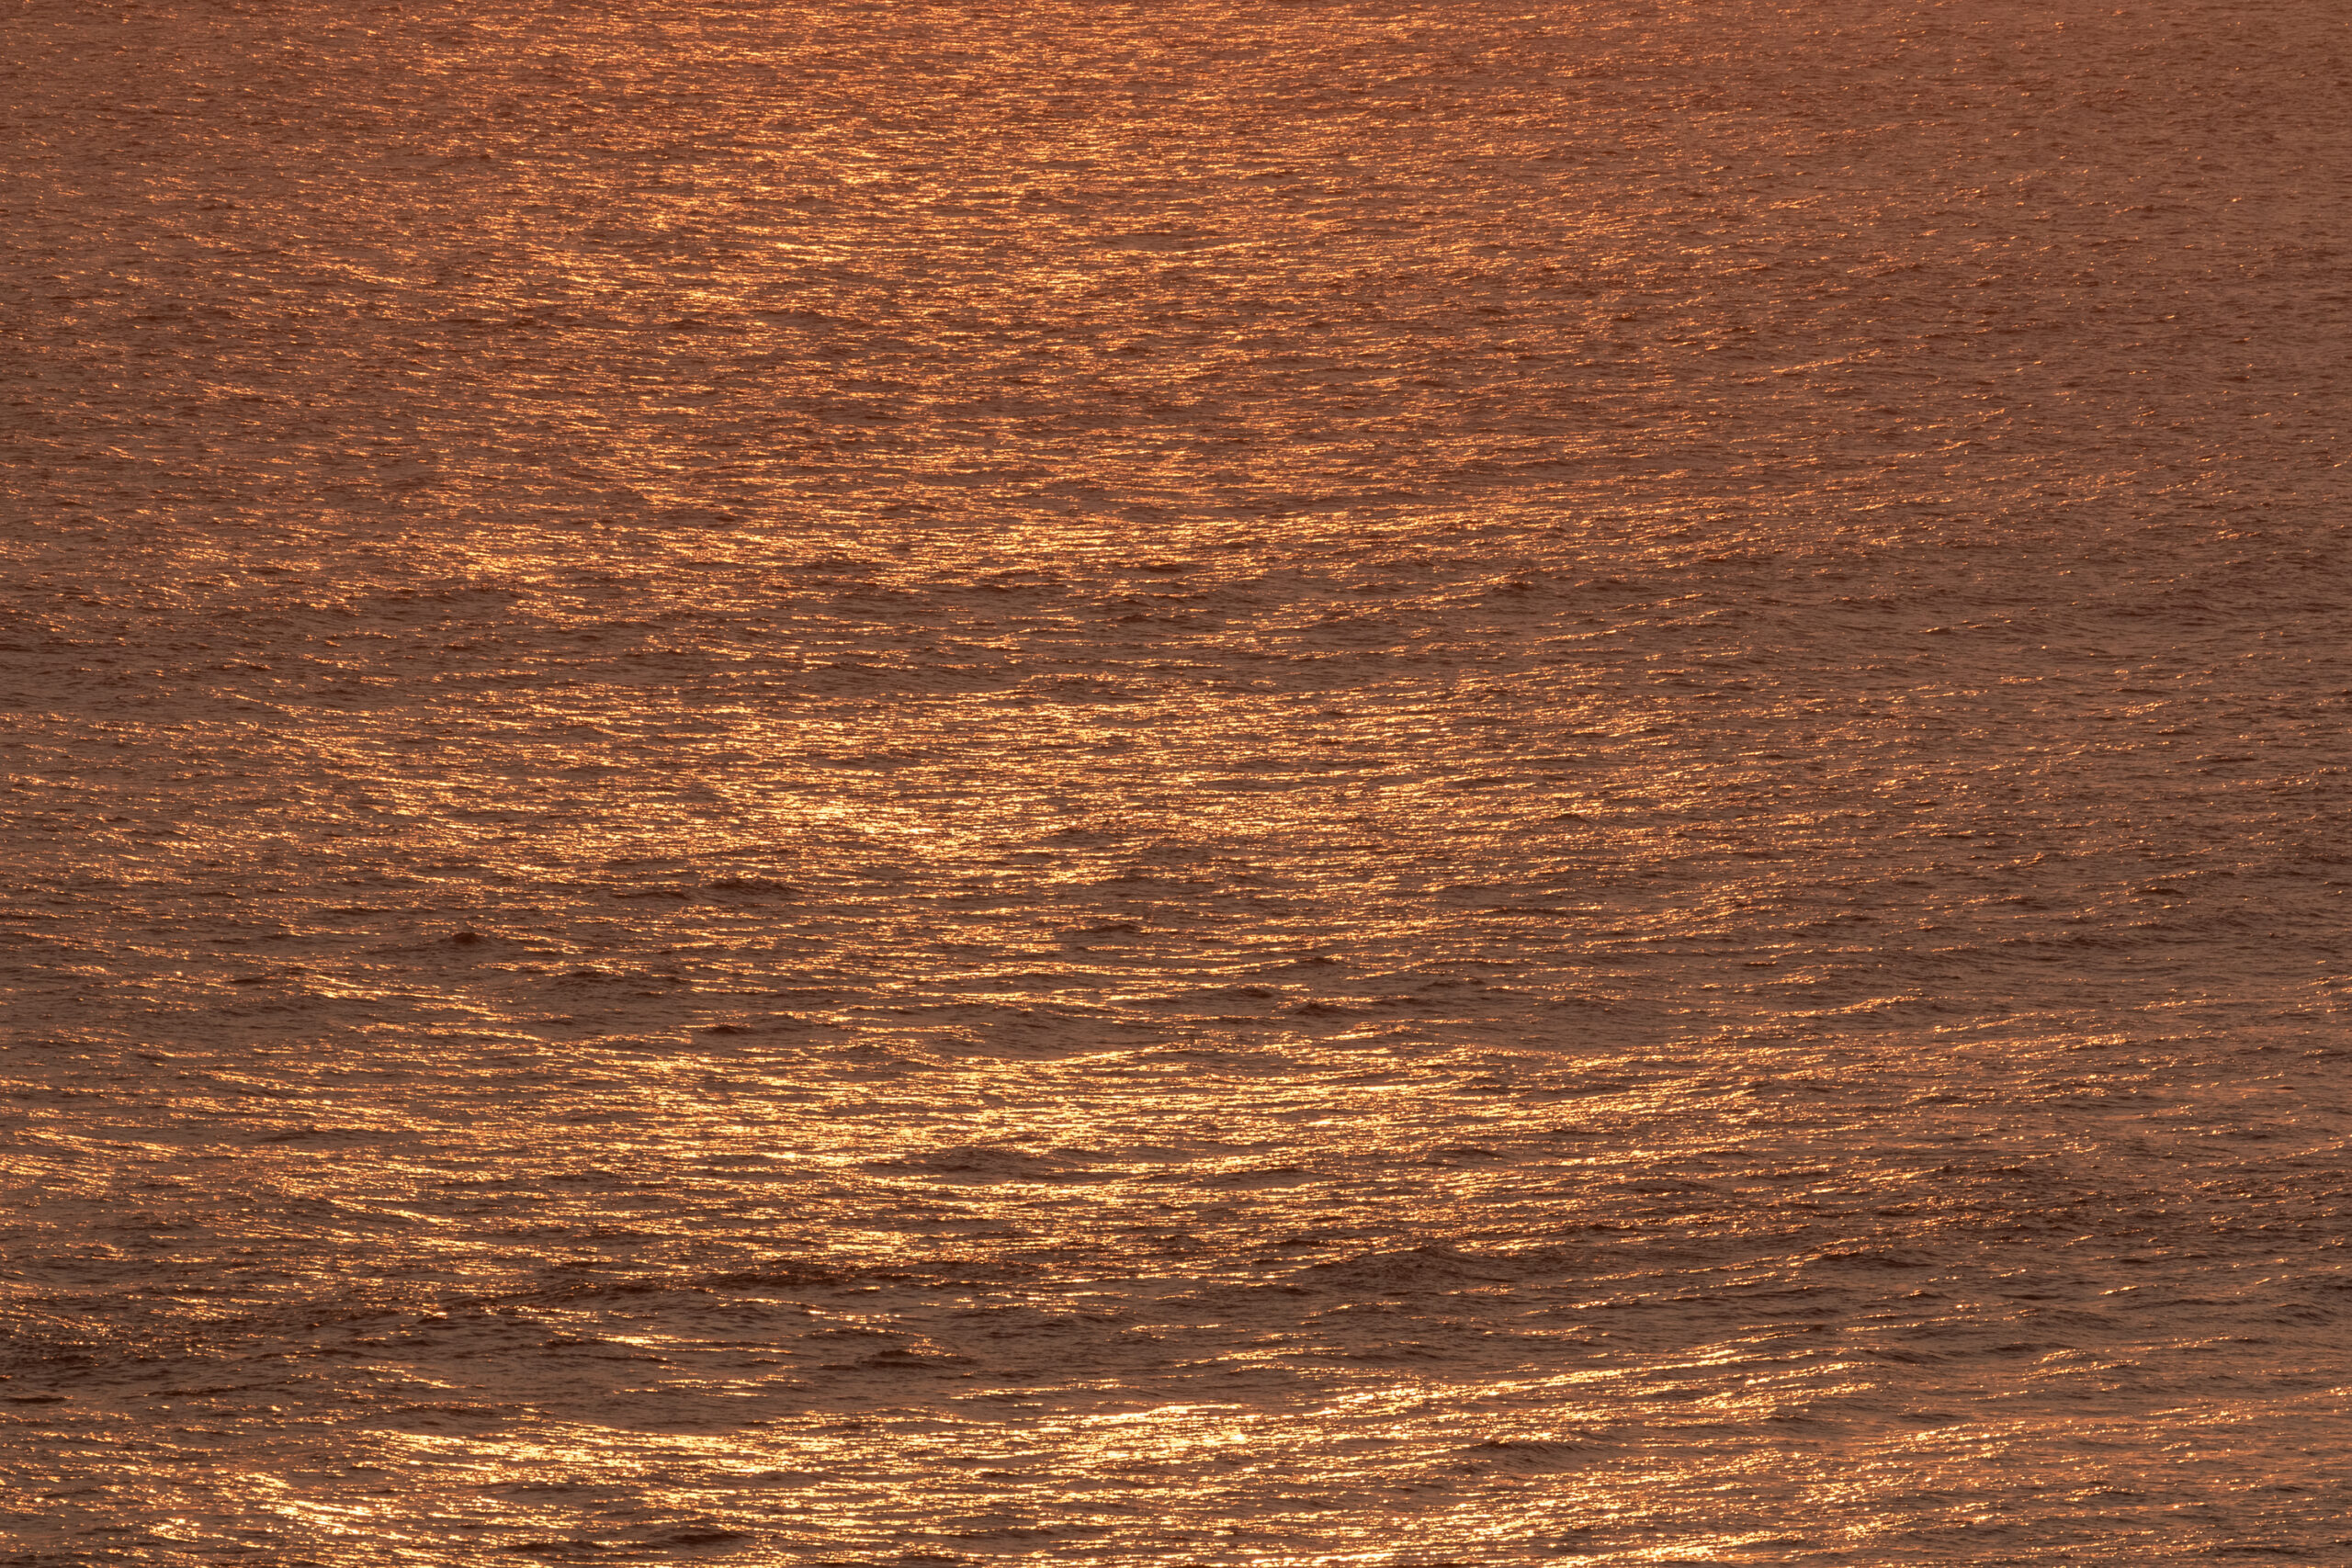 Gold ocean reflections on the surface of an ocean, creating a shimmery effect, by Leonardo Ureña.